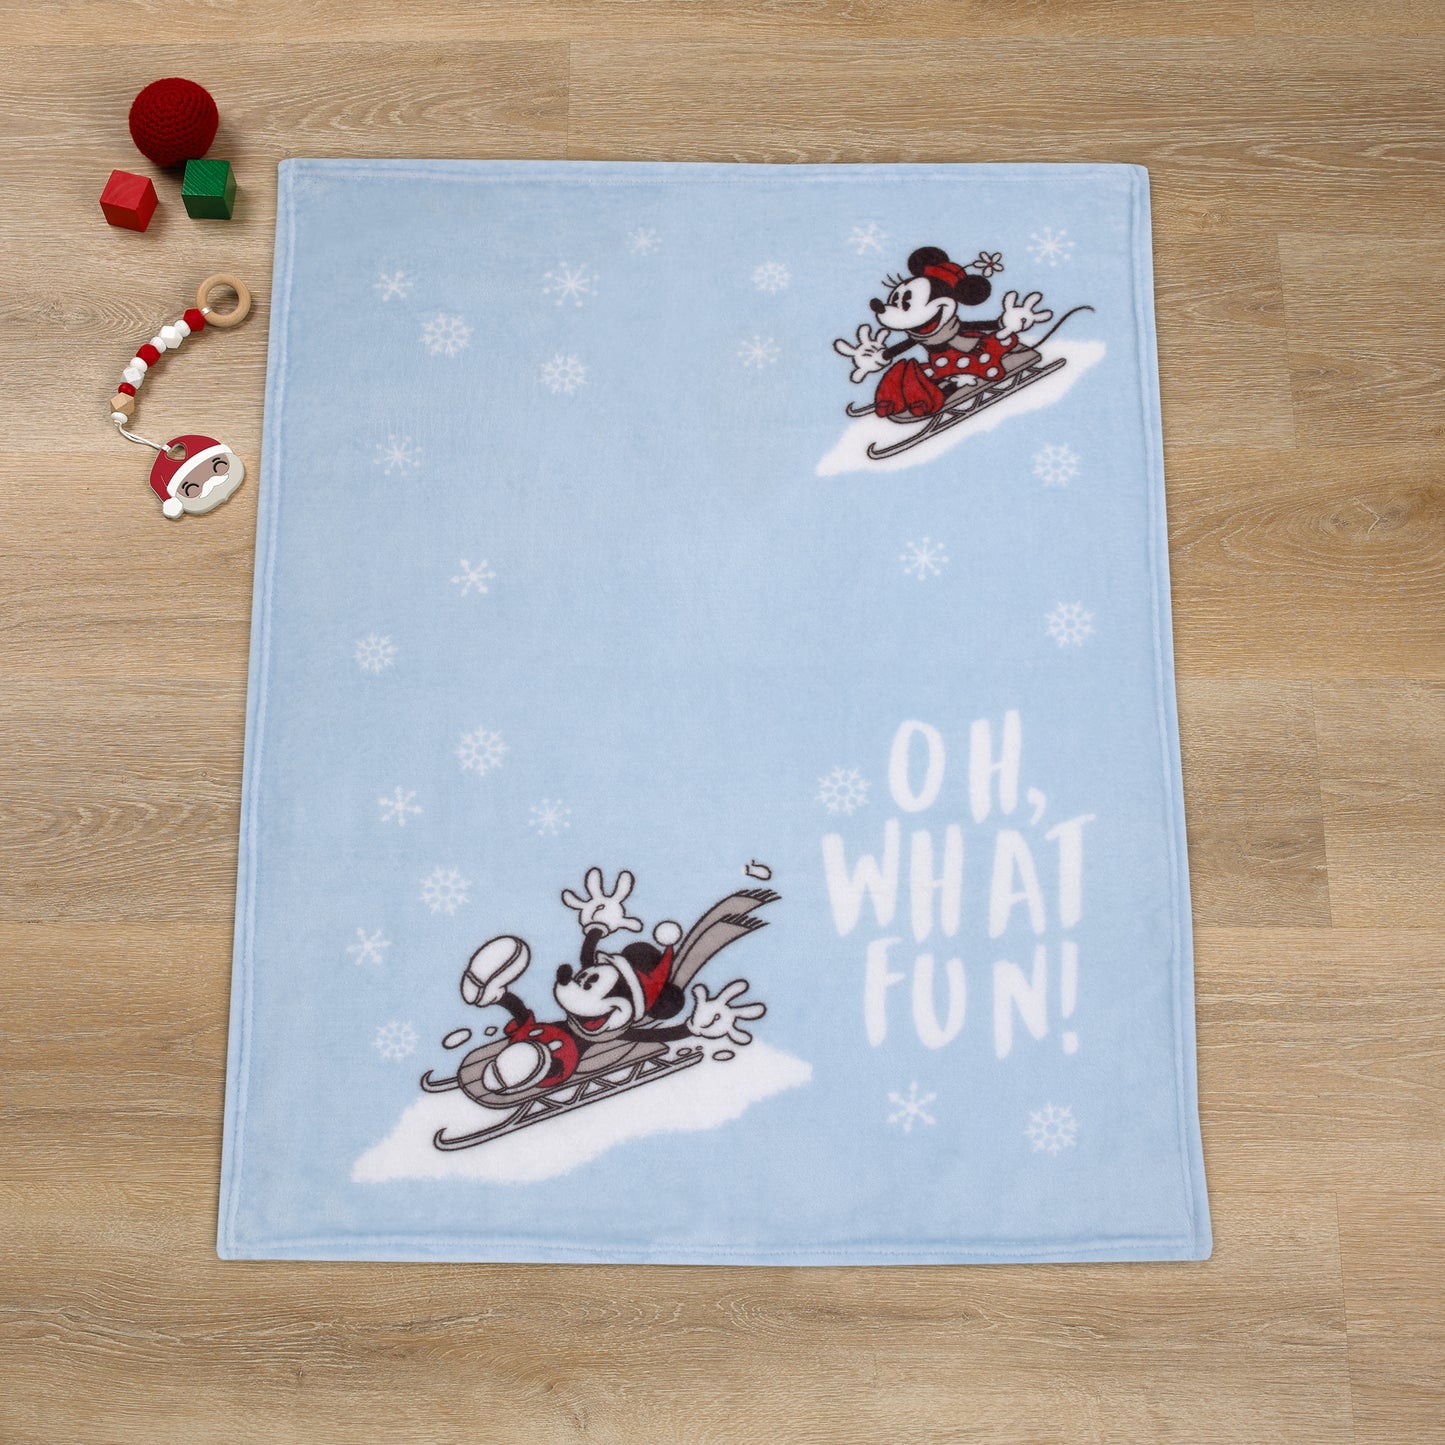 Disney Mickey and Minnie Mouse Blue, White and Red Winter Holiday "Oh, What Fun!" Snowflakes Photo Op Super Soft Baby Blanket